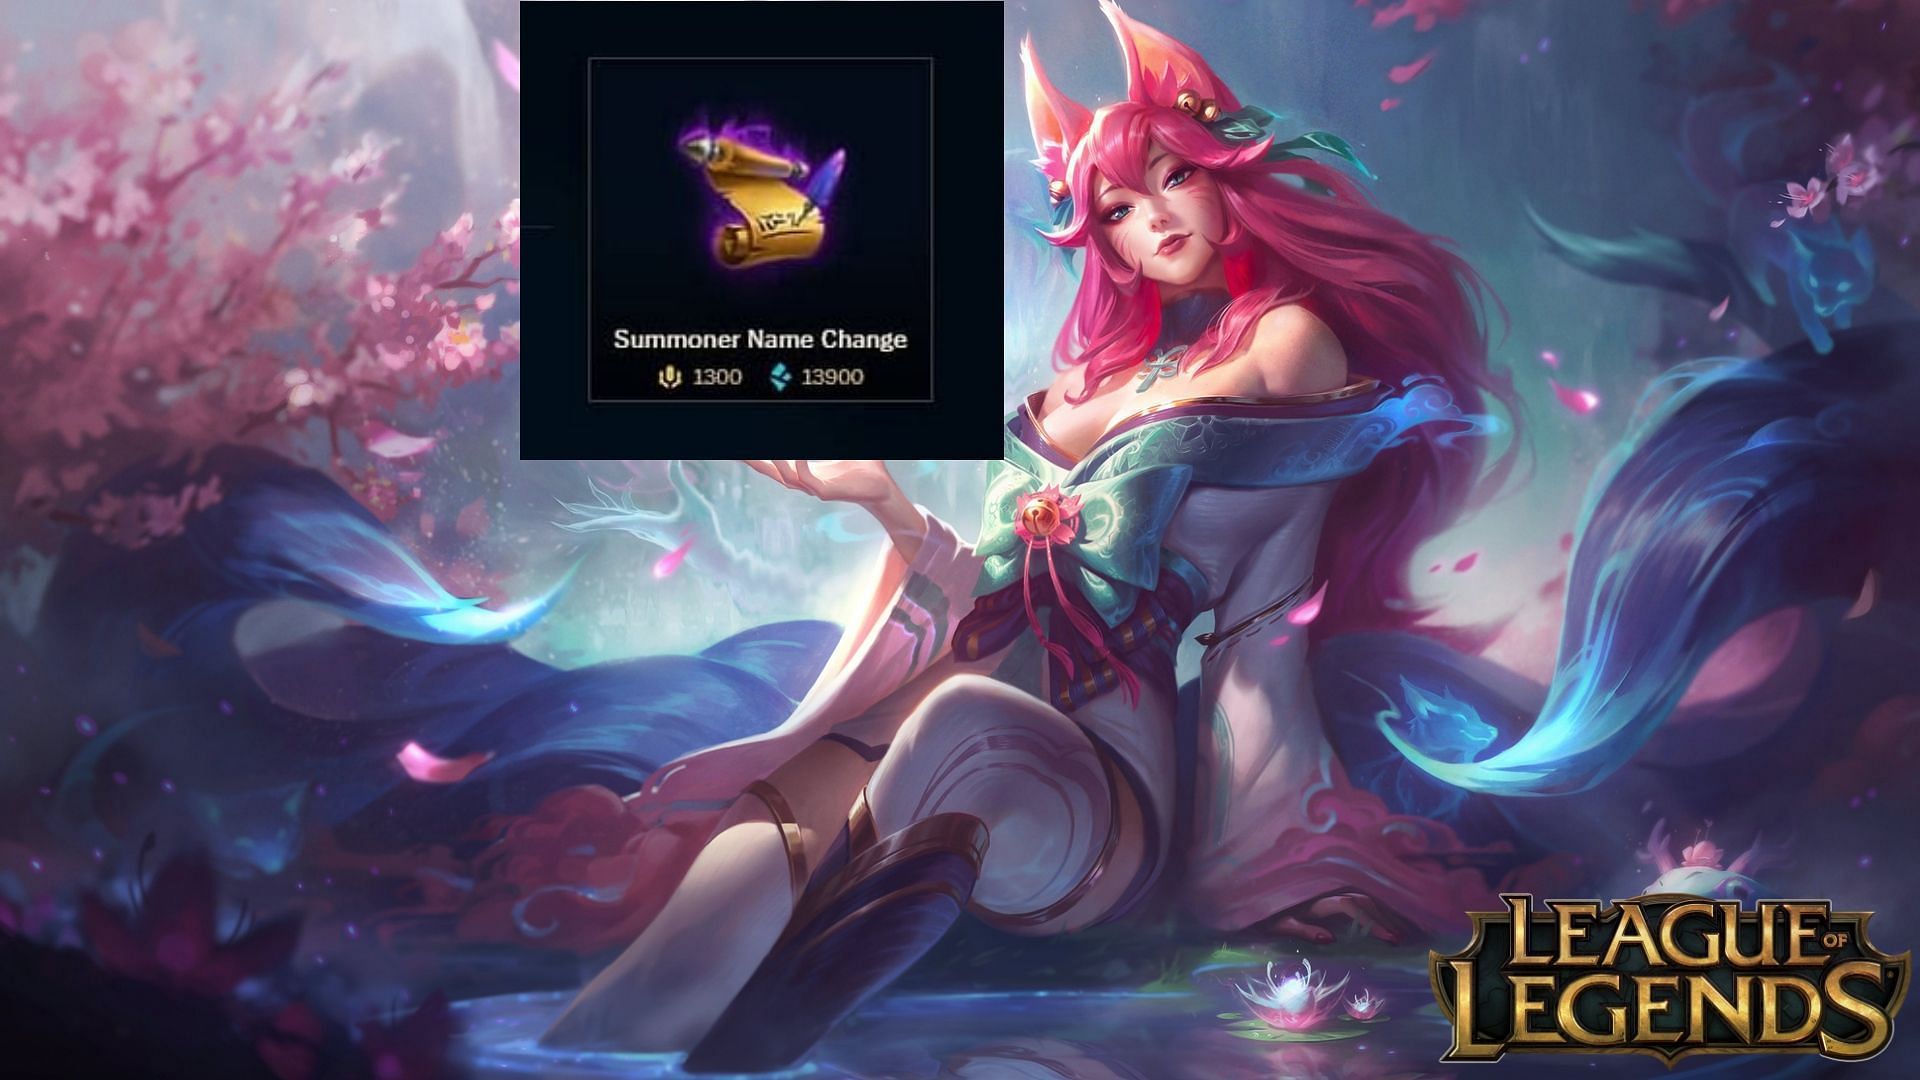 Summoner Name can be changed in LoL for BE, RP, and sometimes also for free (Images via Riot Games)